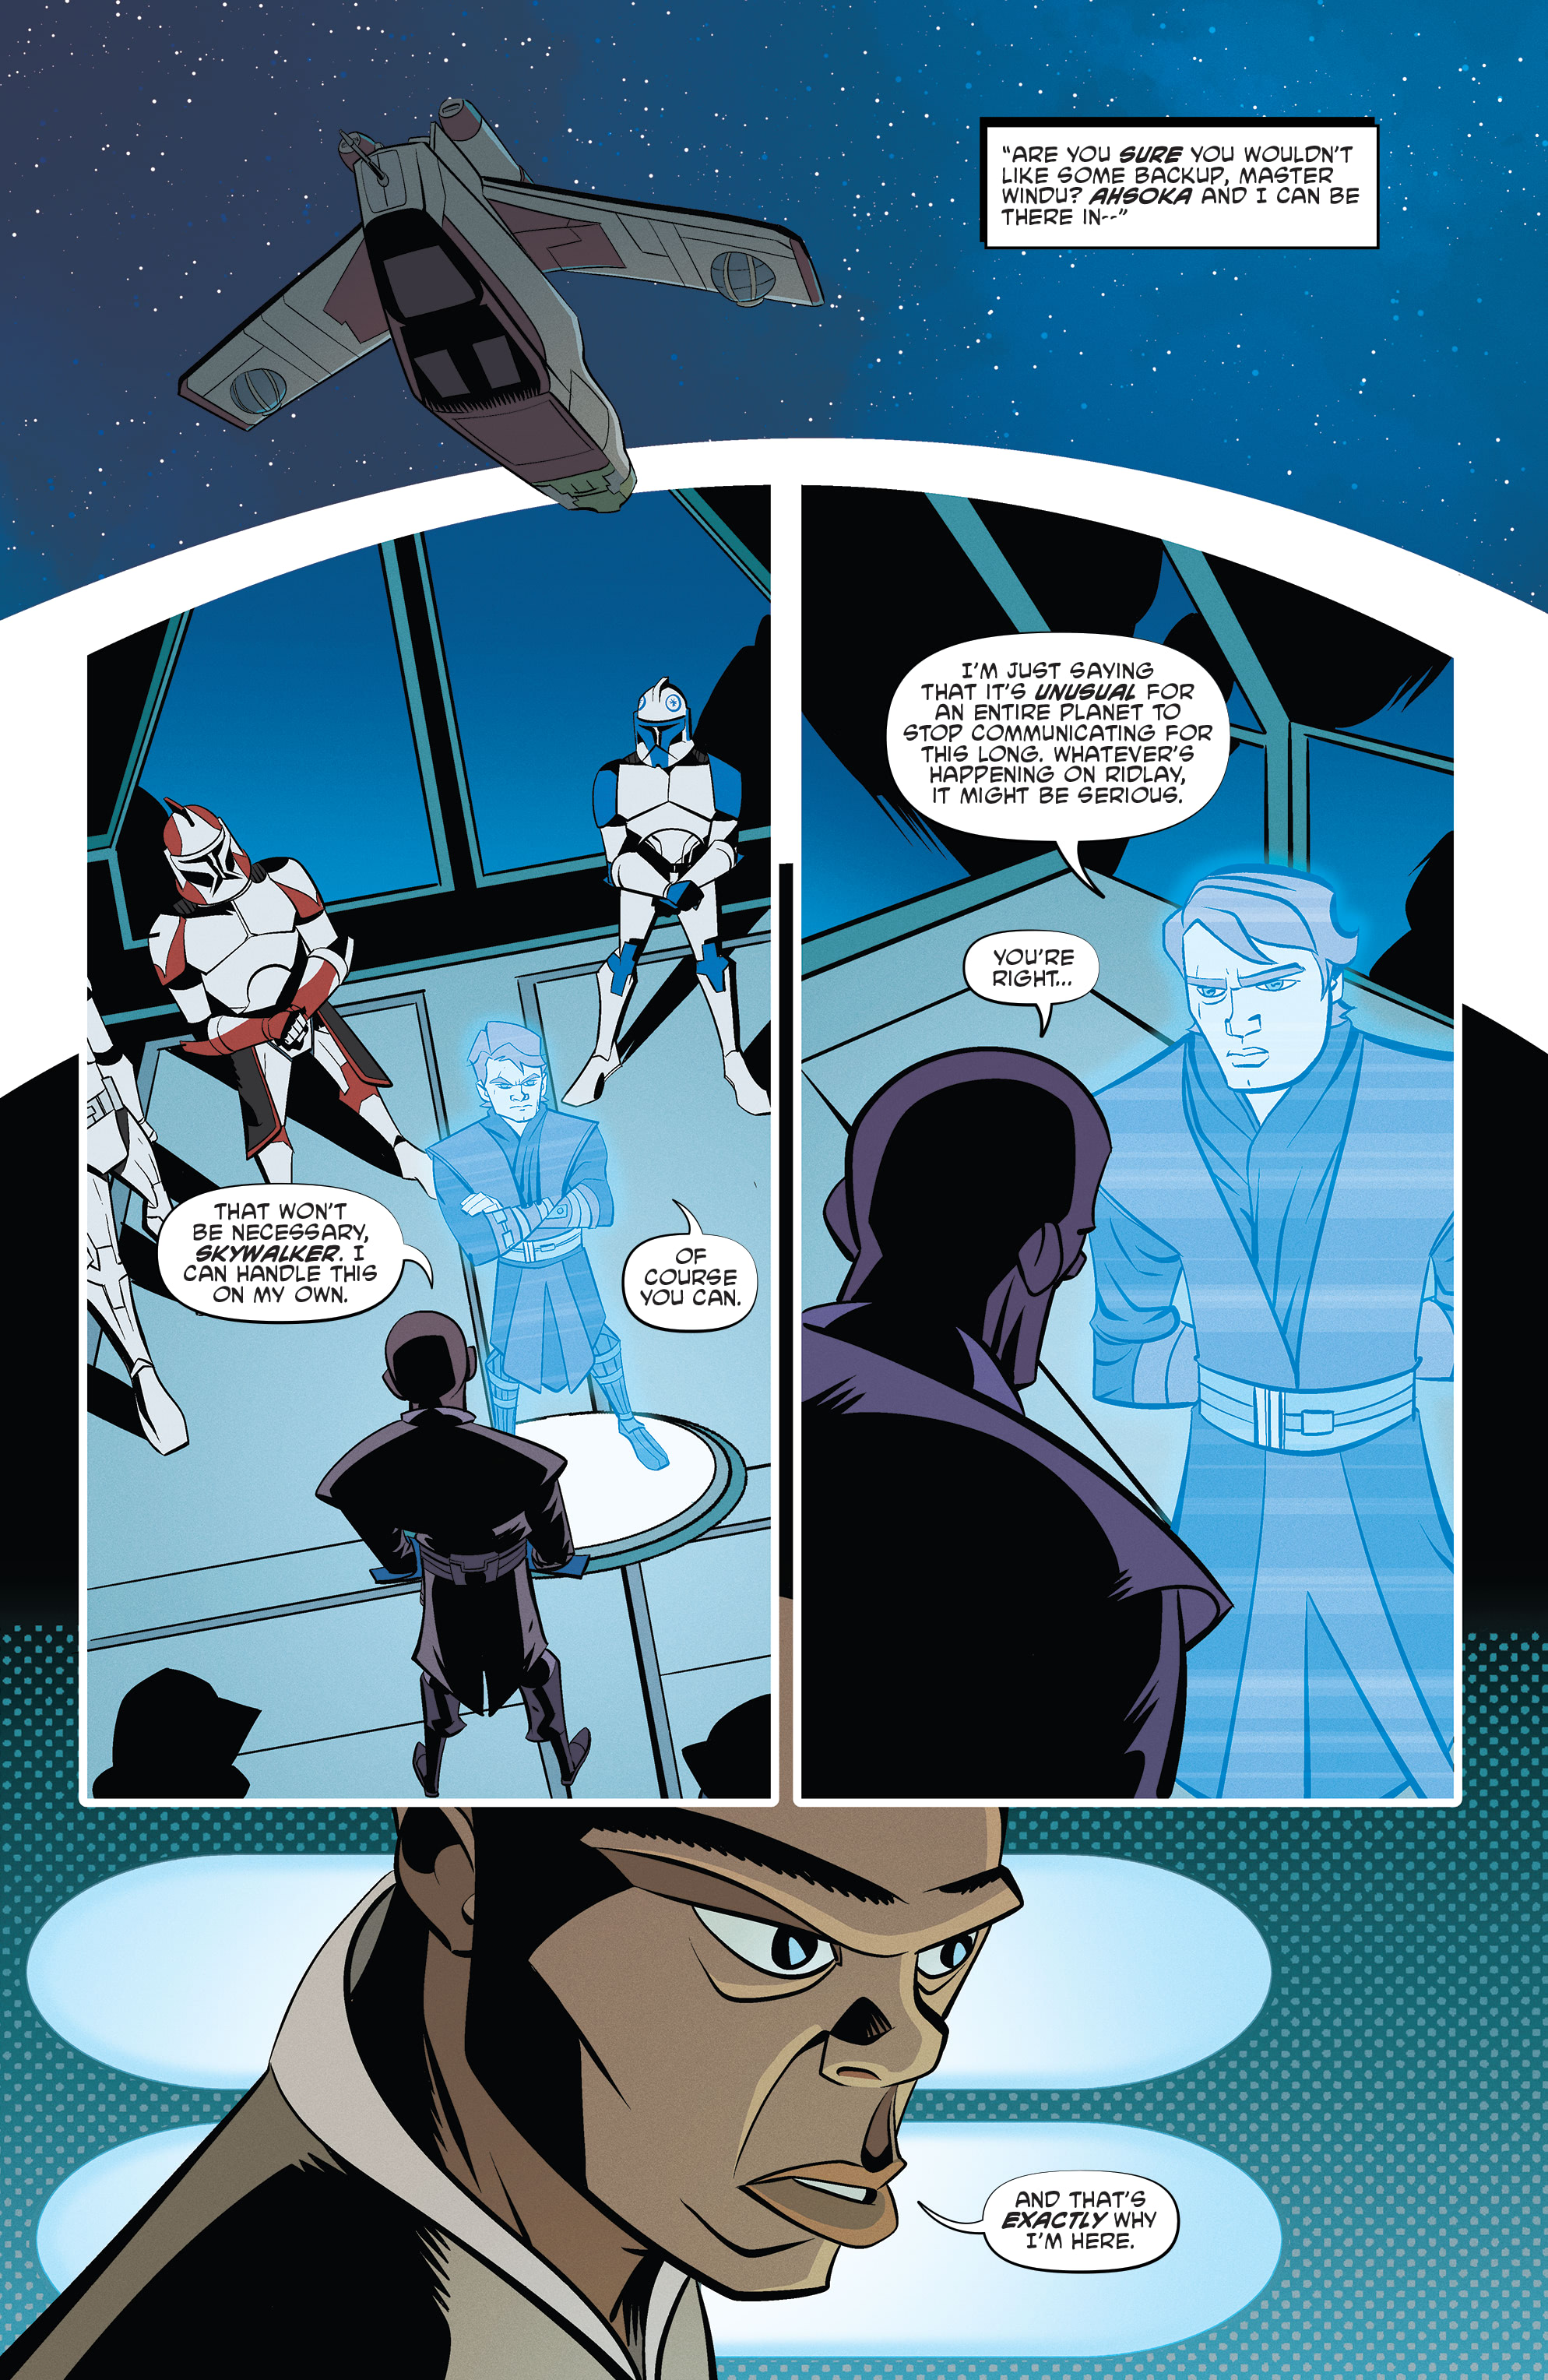 Star Wars Adventures (2020-): Chapter 9 - Page 3